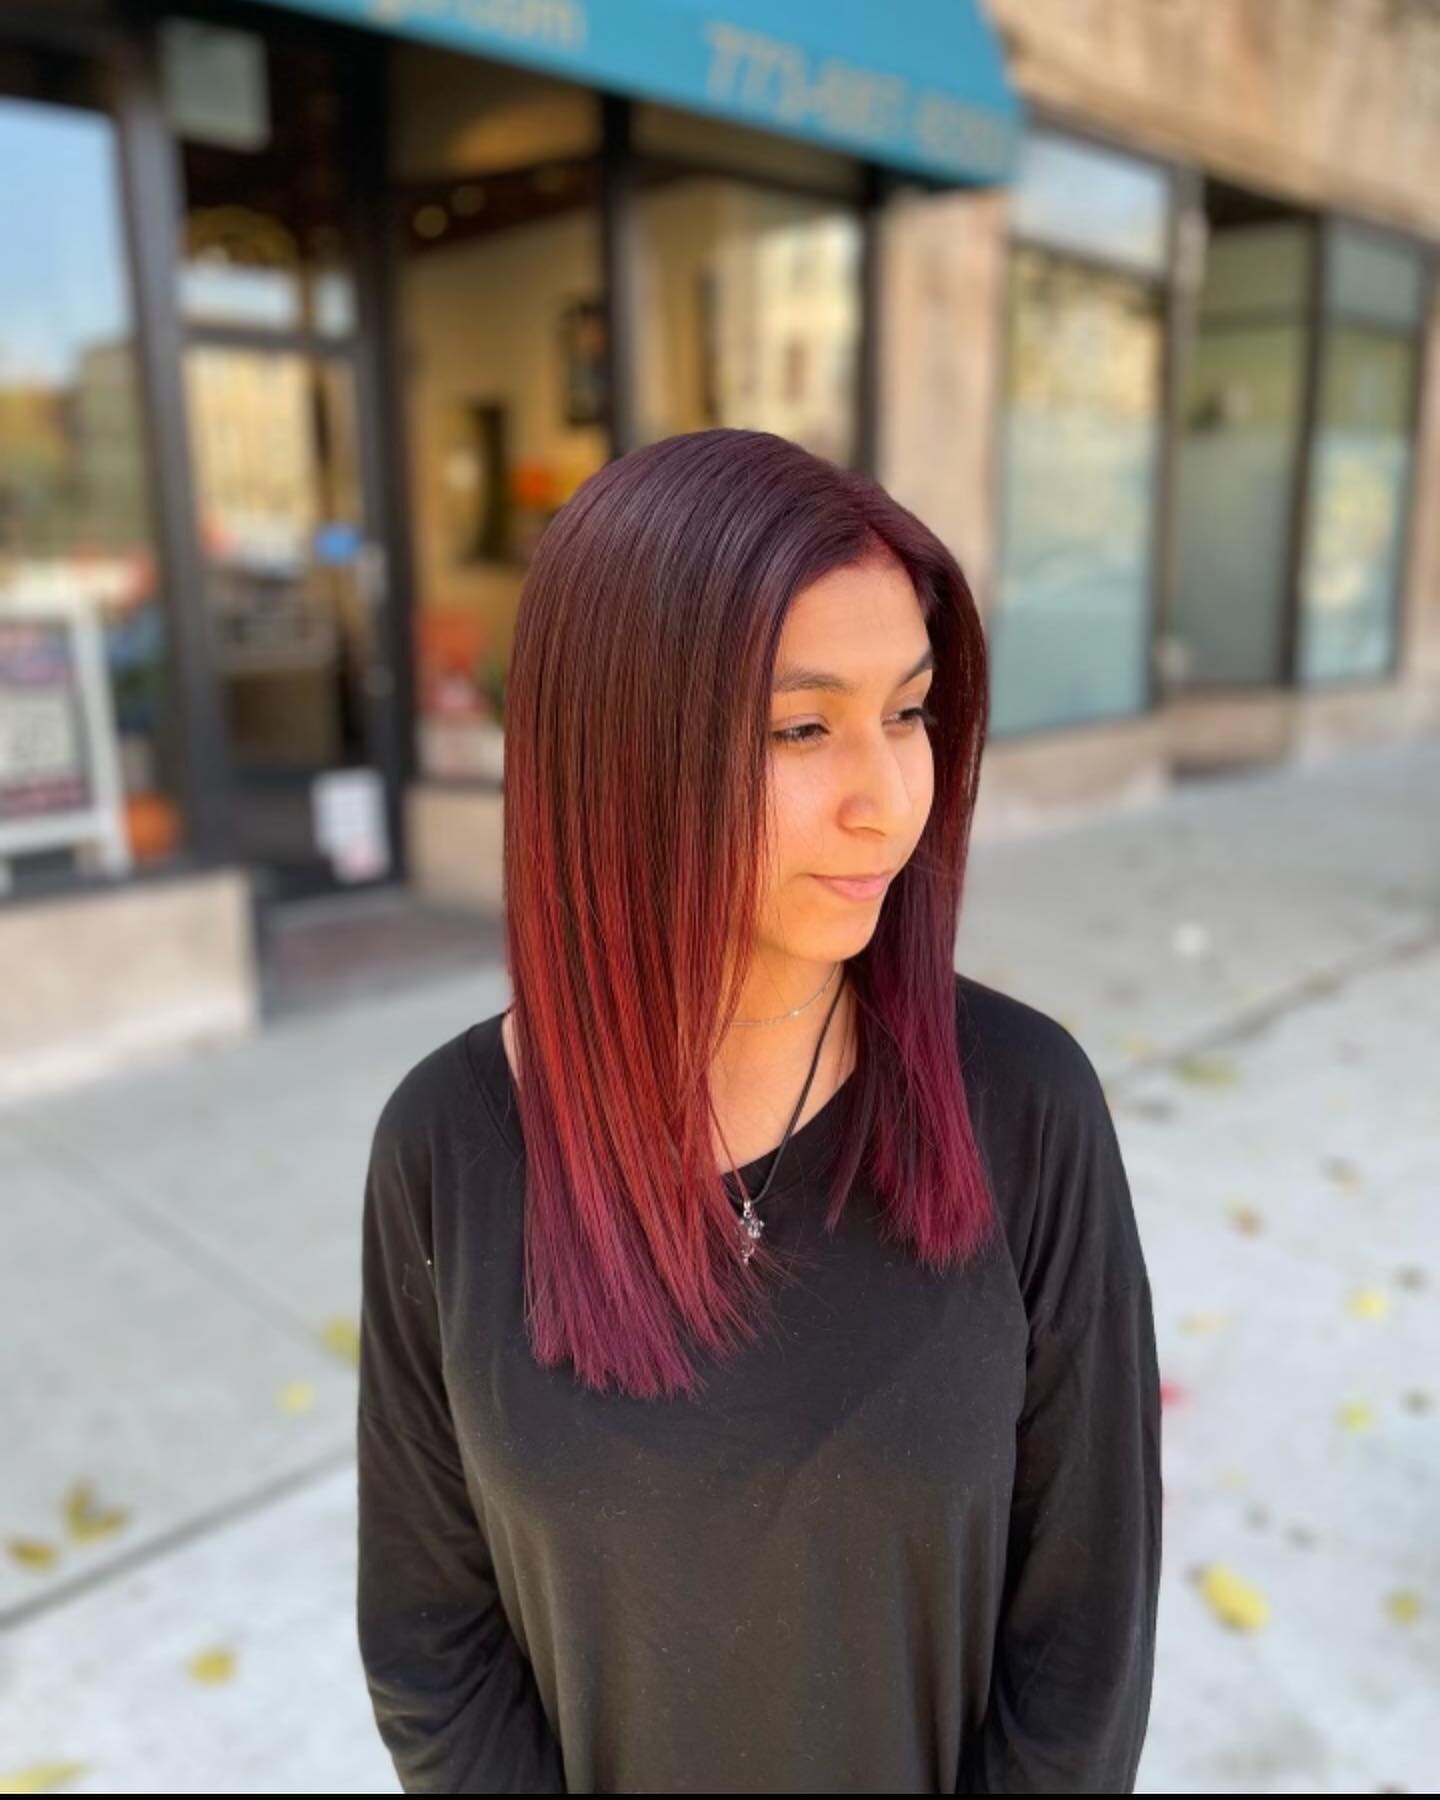 Roses are red, and so is Juri&rsquo;s hair! Check out this transformation! 🌹❤️🔥
.
.
#rksalonchicago #transformation #redhair #autumnvibes #haircolor #chicagohair #chicagosalon #chicagohairstylist #beforeandafter #wellahair #lakeviewsalon #chicago #